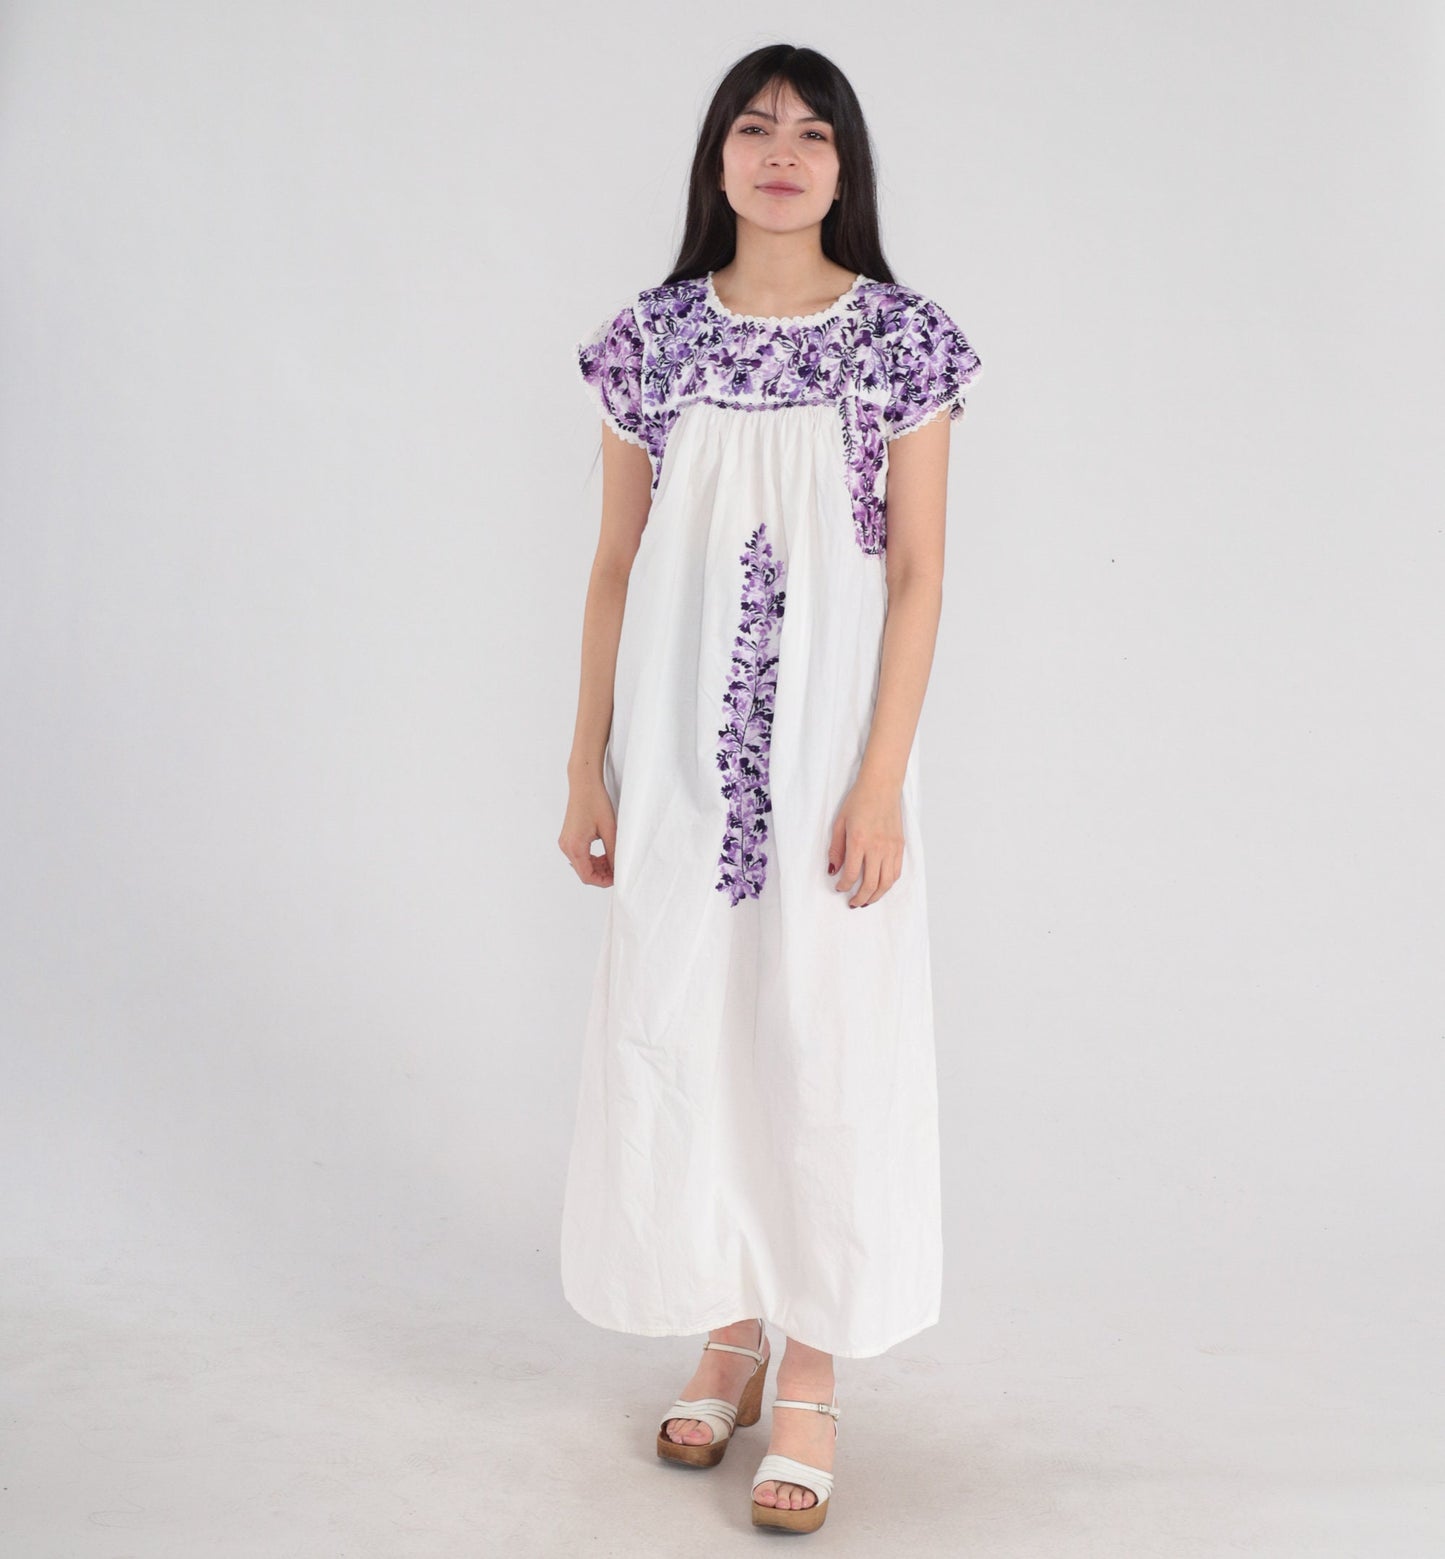 Mexican Embroidered Dress 90s White Oaxacan Floral Midi Dress Purple Flower Tent Peasant Cotton Hippie Summer Vintage 1990s Small Medium